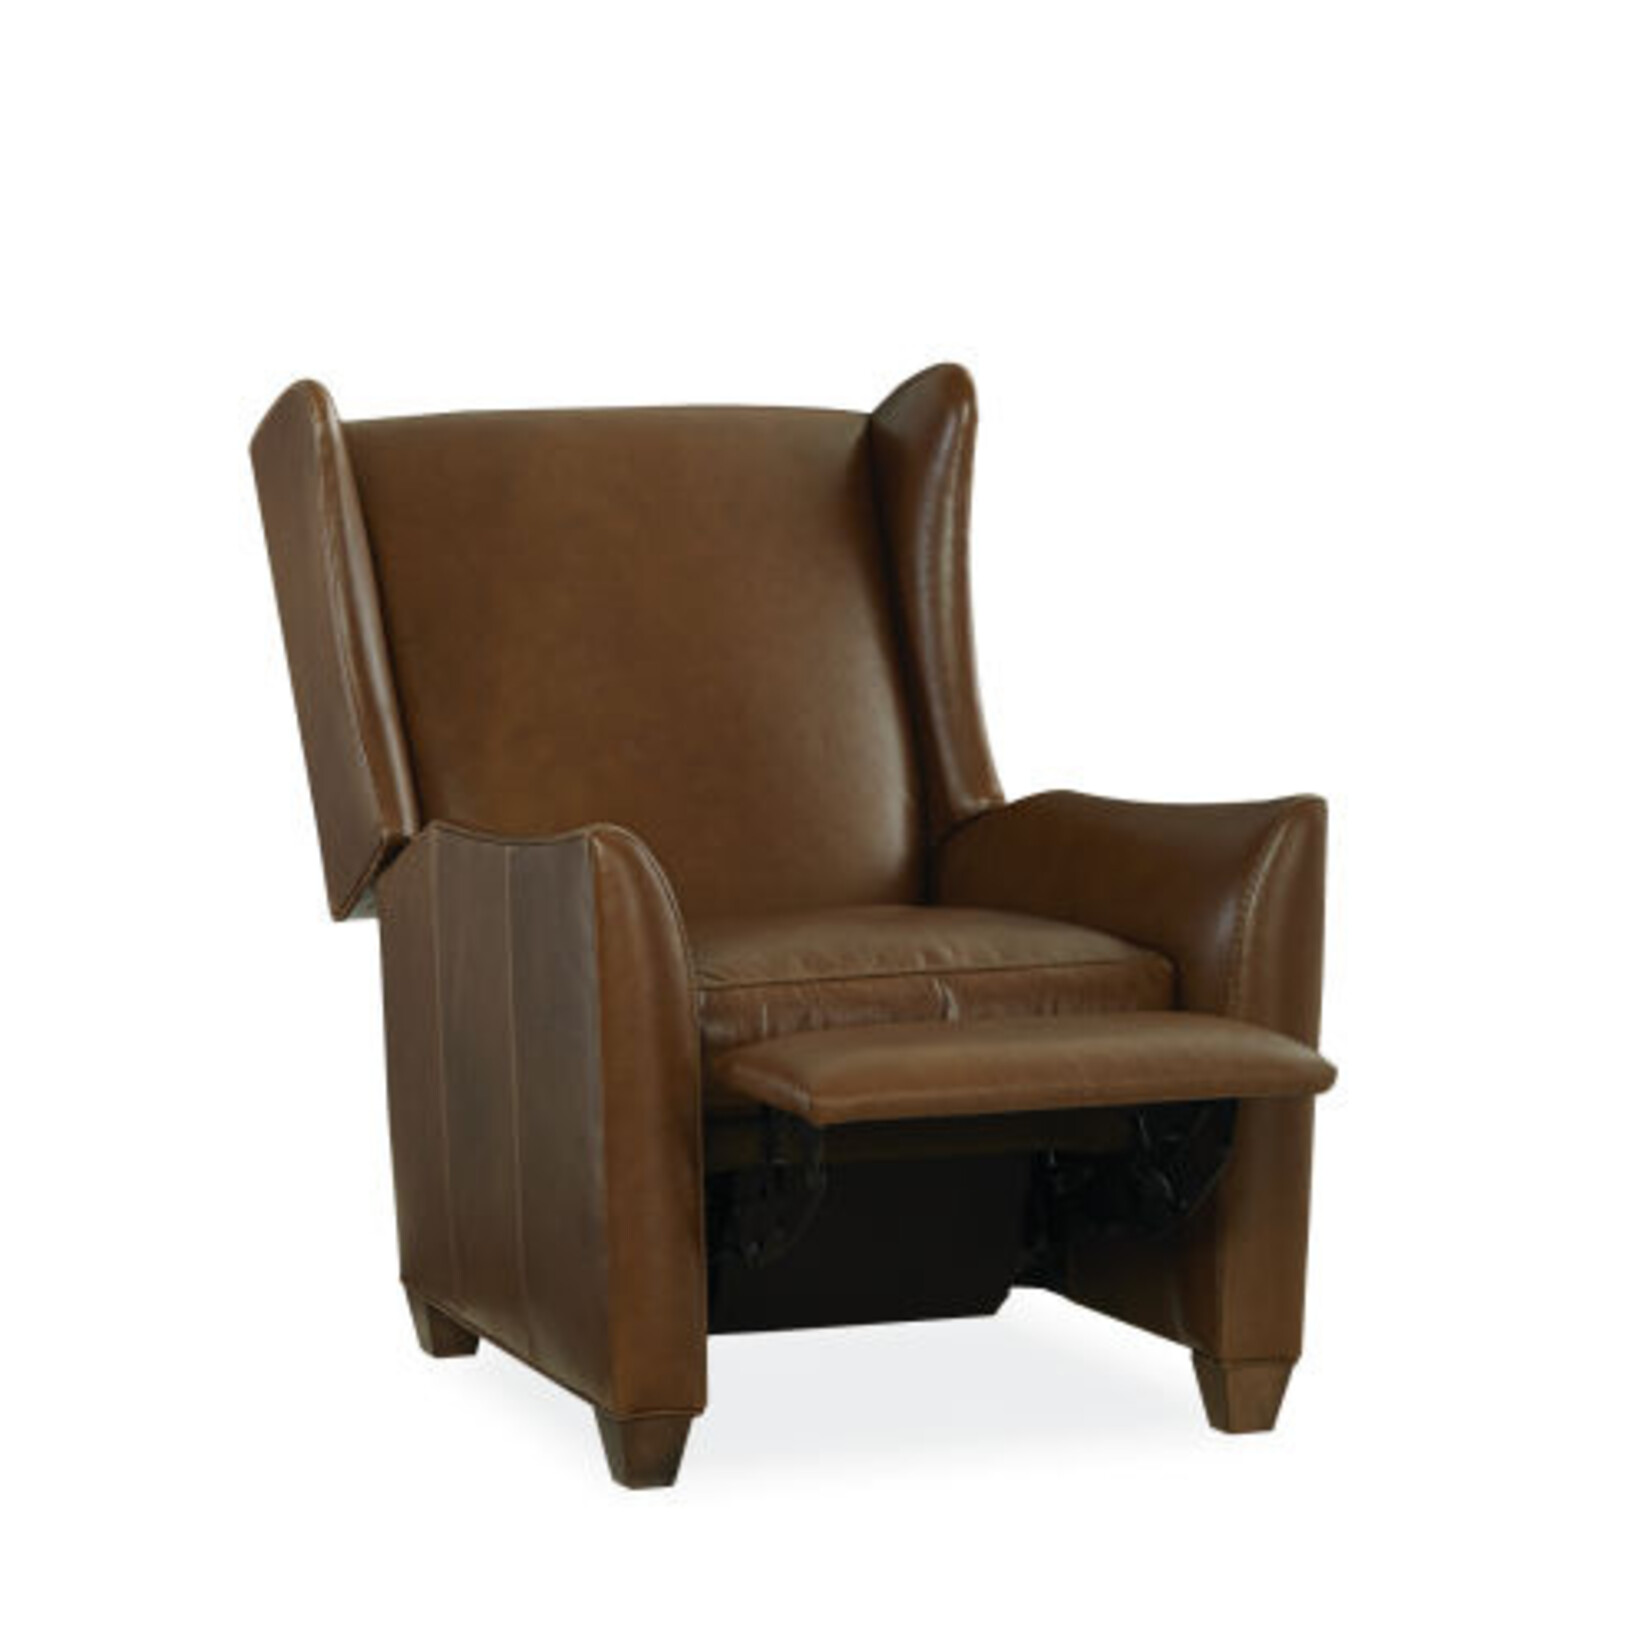 1822 Leather Relaxor - Chaps Toffee